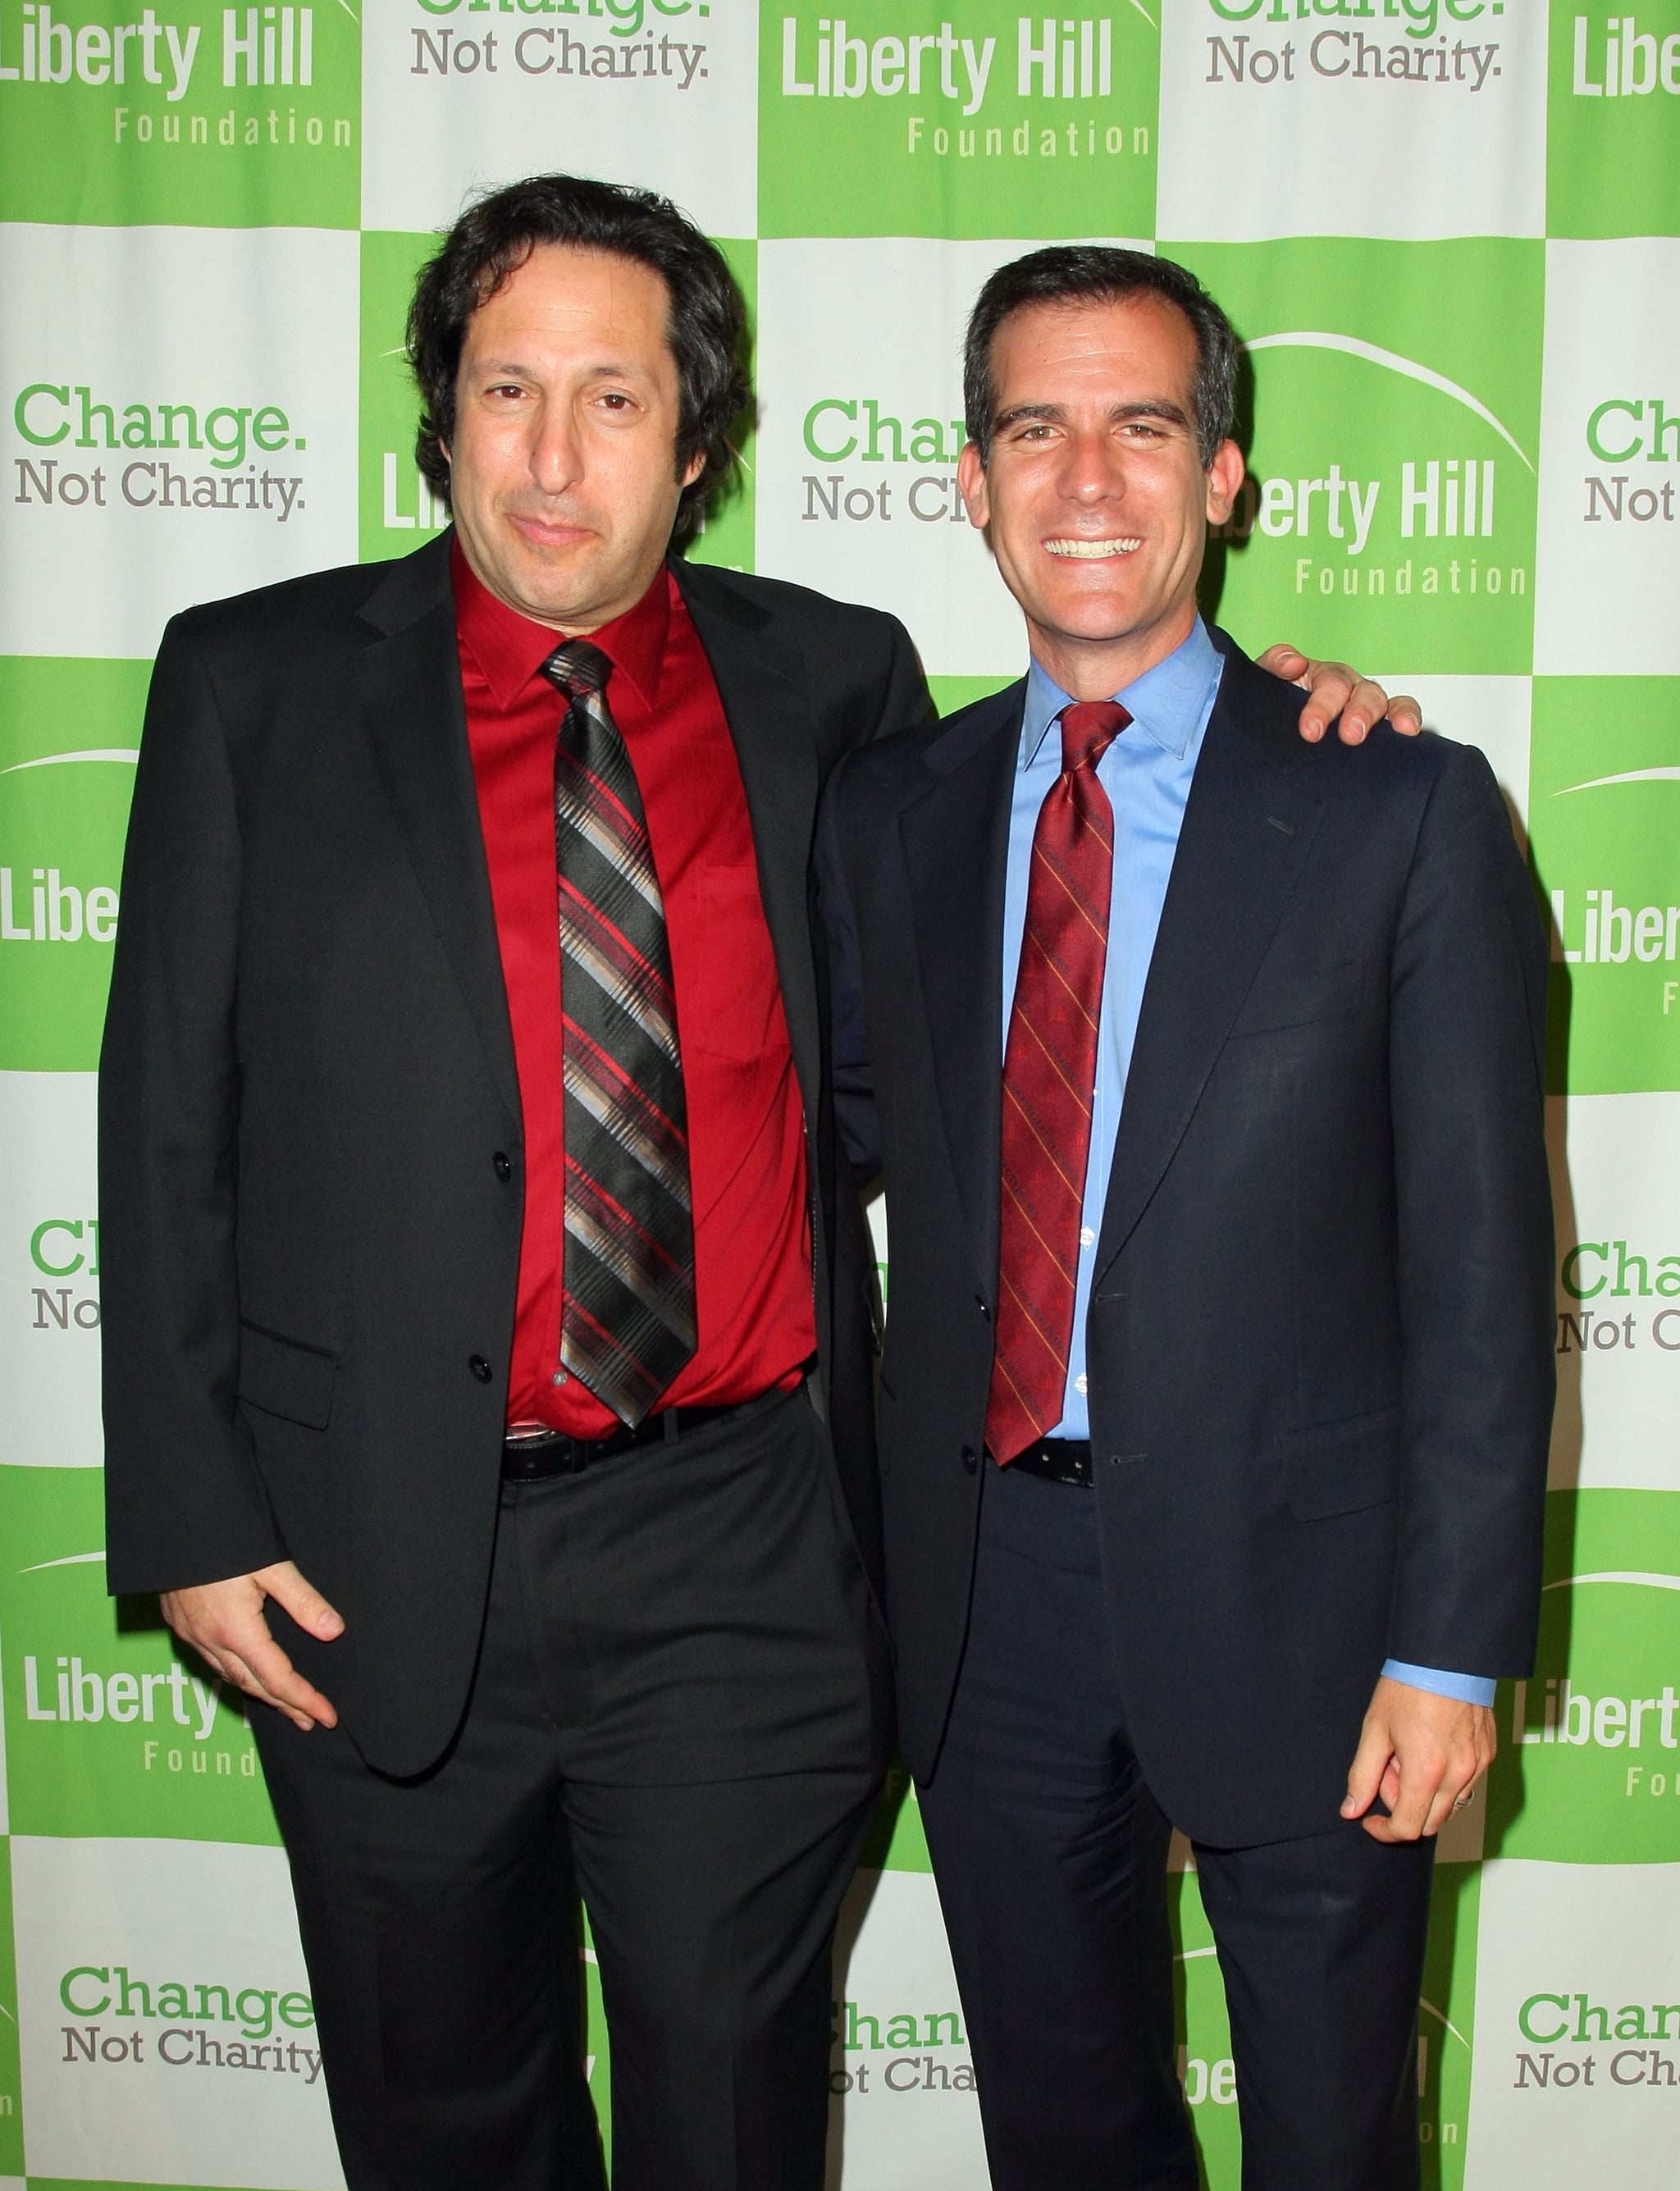 BEVERLY HILLS, CA - MAY 11:  Founders Honoree Gary Stewart and Los Angeles City Council President Eric Garcetti arrive for the Liberty Hill Upton Sinclair Awards Dinner at The Beverly Hilton Hotel on May 11, 2011 in Beverly Hills, California.  (Photo by Victor Decolongon/Getty Images)